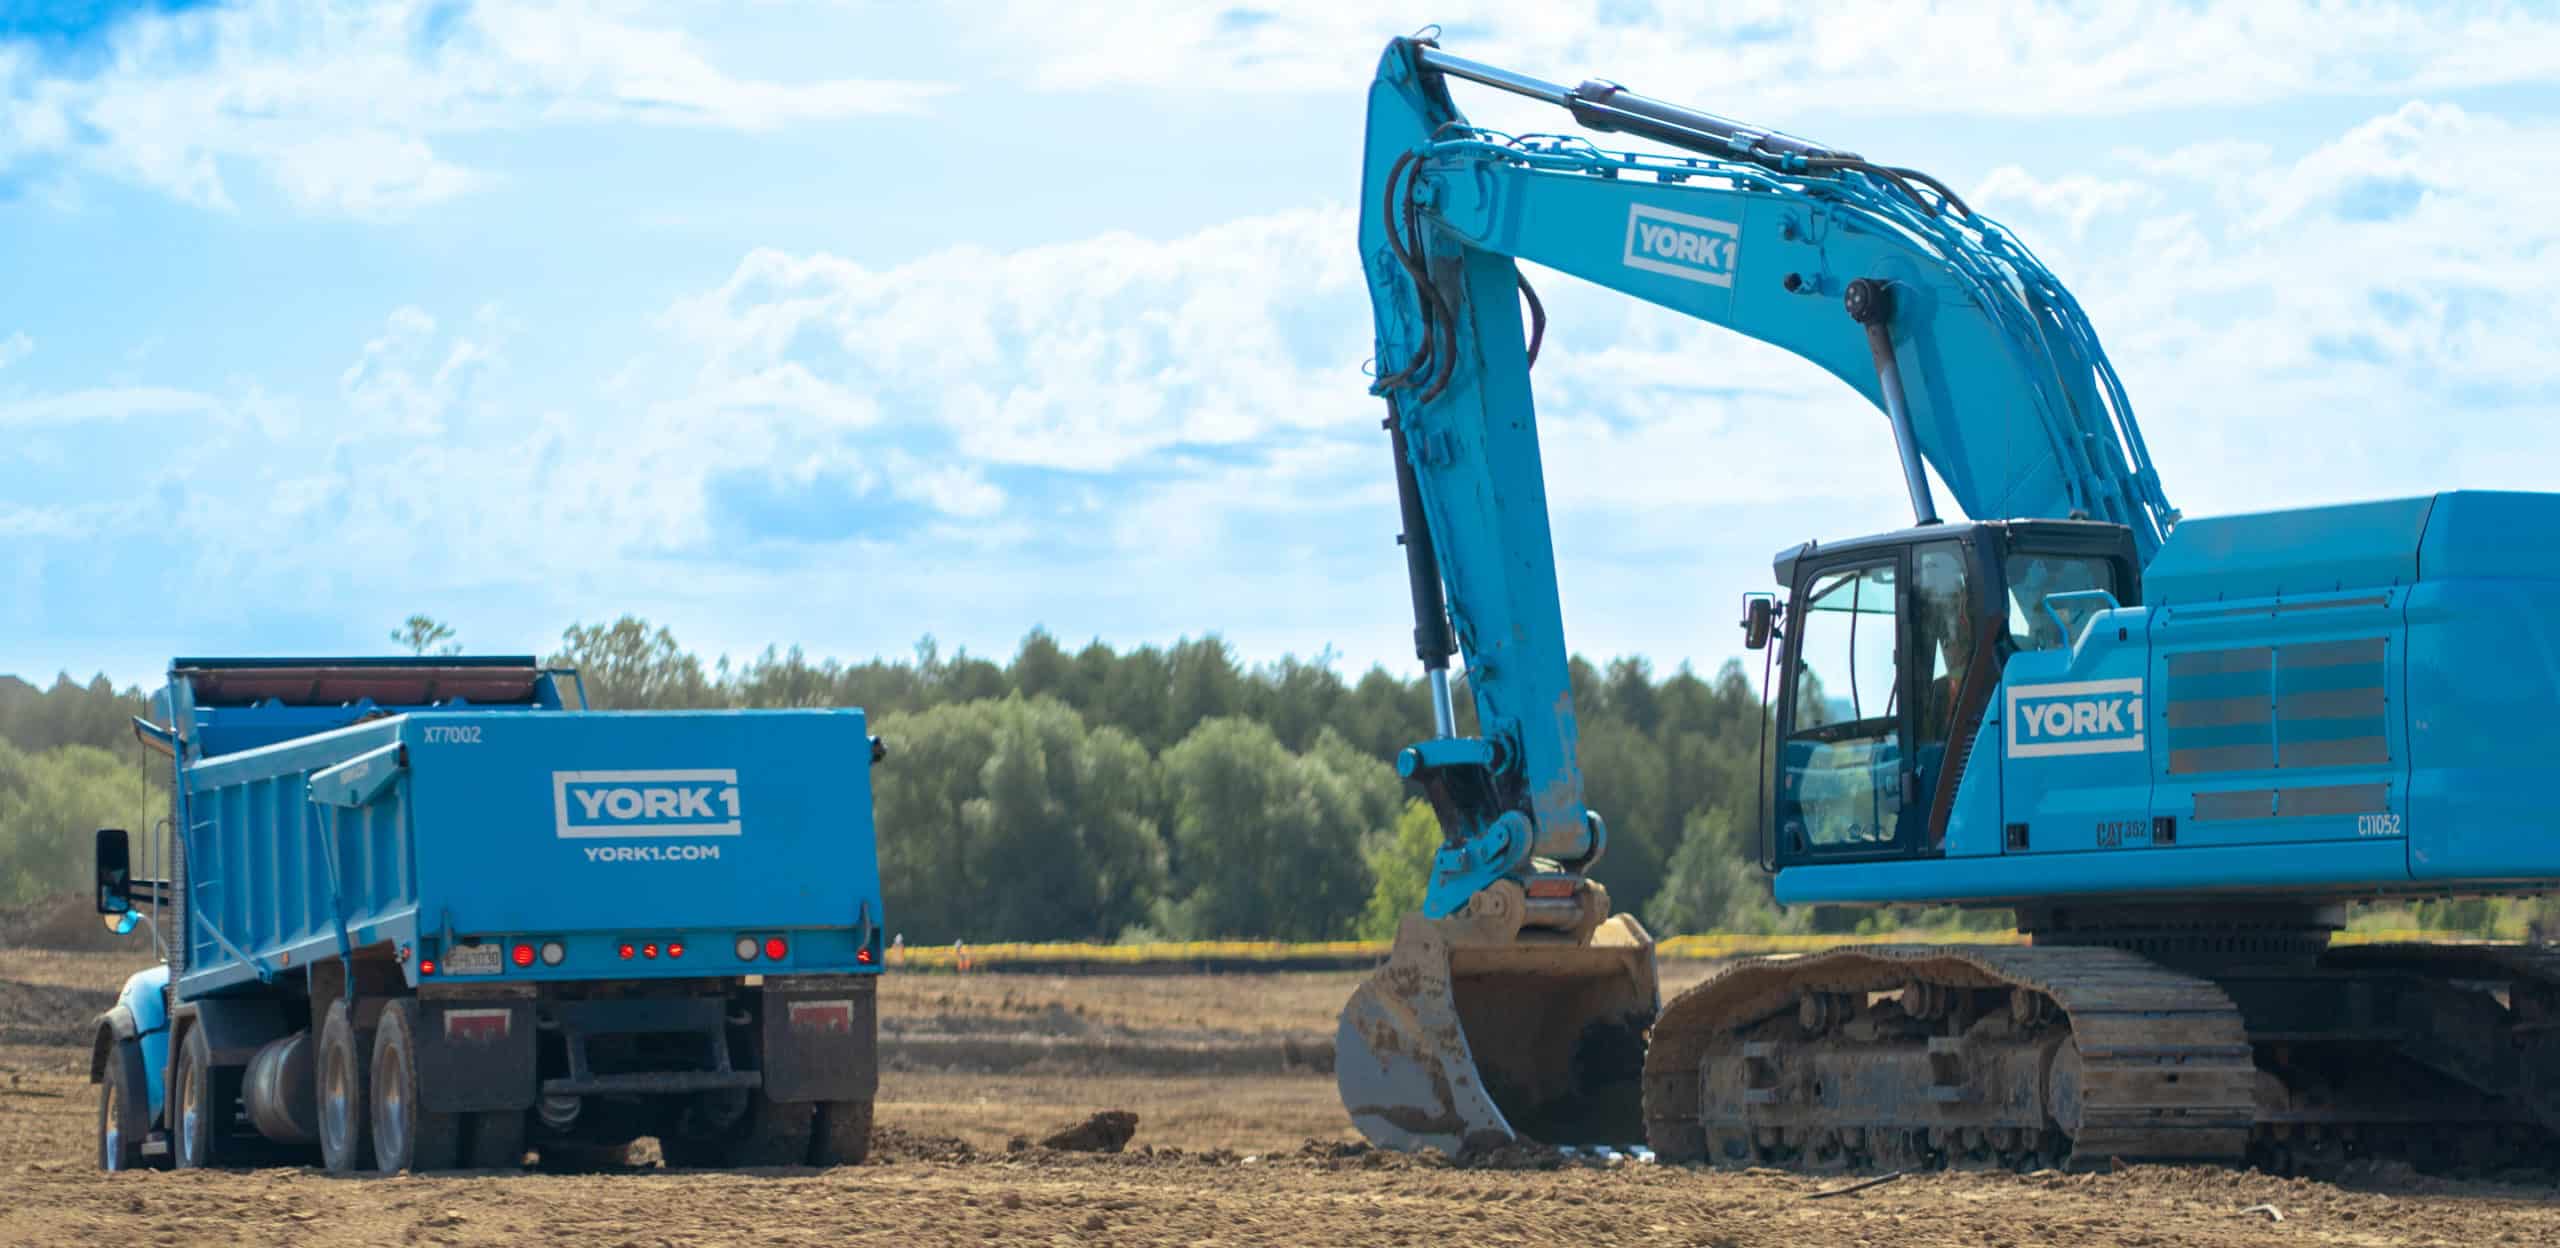 A cyan York1 excavator is loading dirt into a York1 dump truck in an open field with trees in the background.